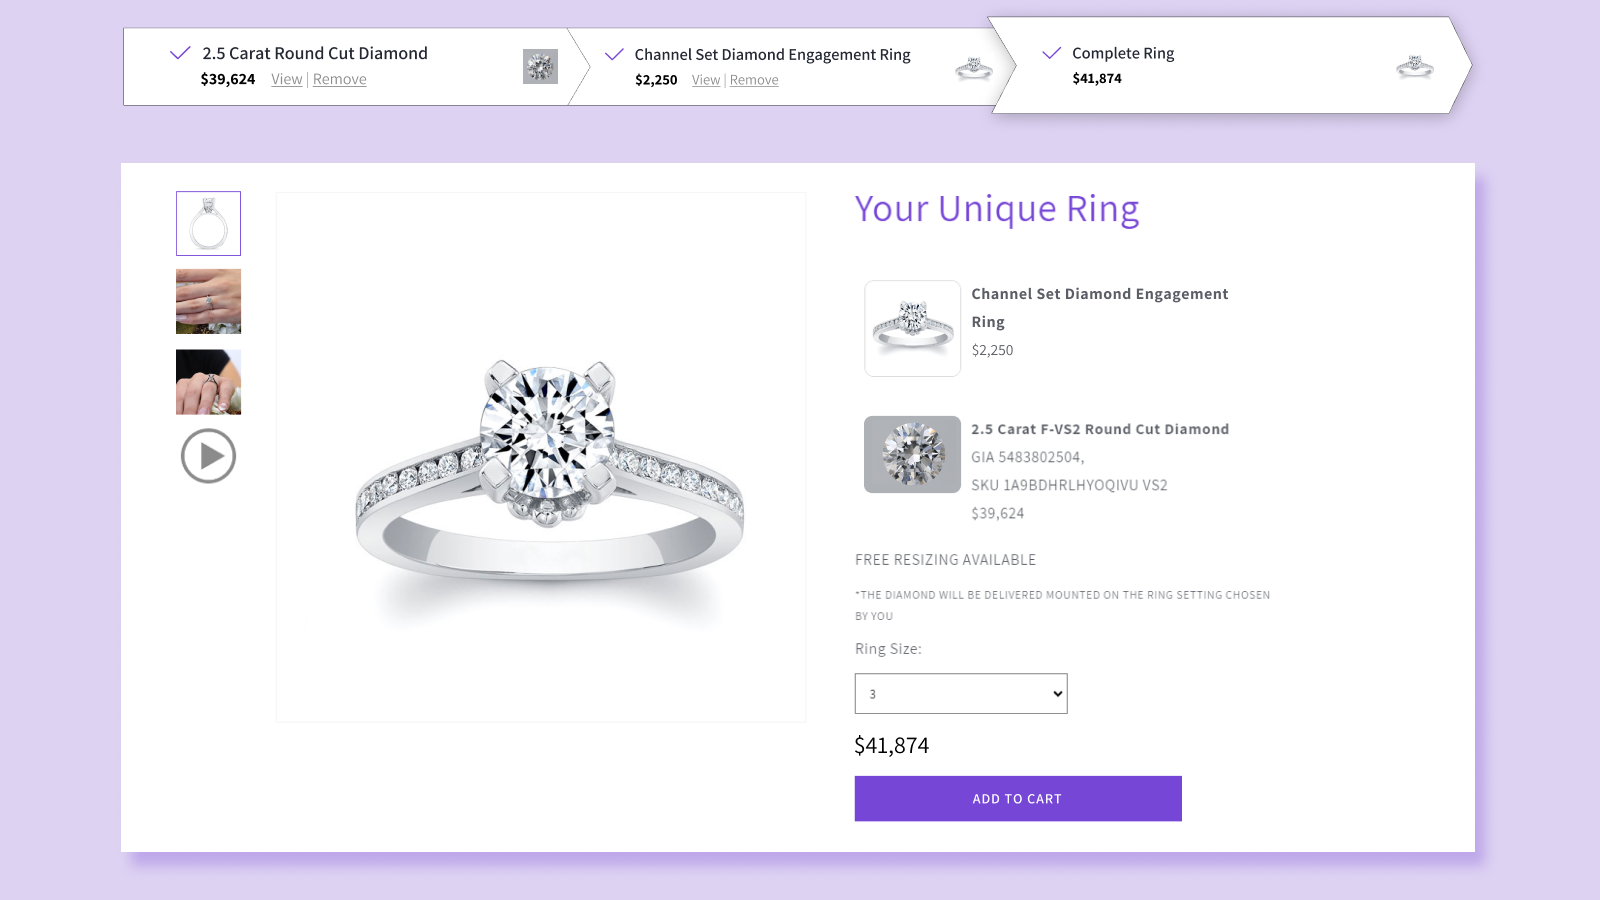  Keyideas' state-of-the-art Ring Builder Solution for jewelers